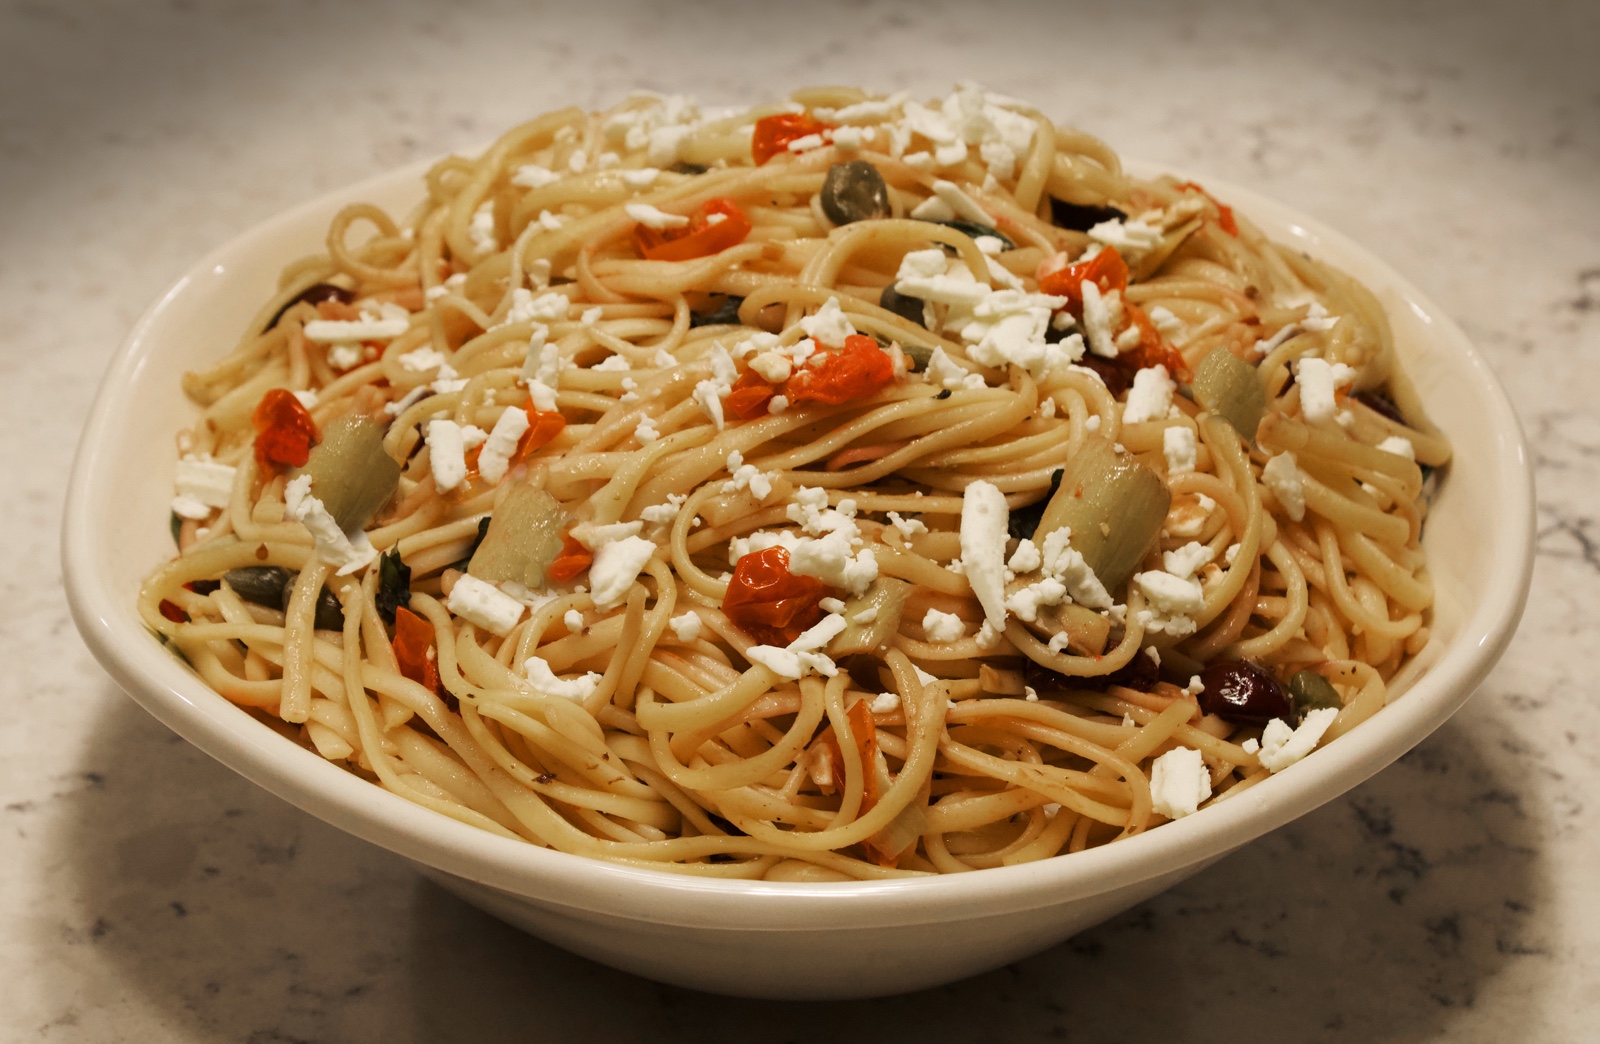 Spaghetti served in a white bowl tossed with capers, olives, tomatoes, feta cheese and artichokes